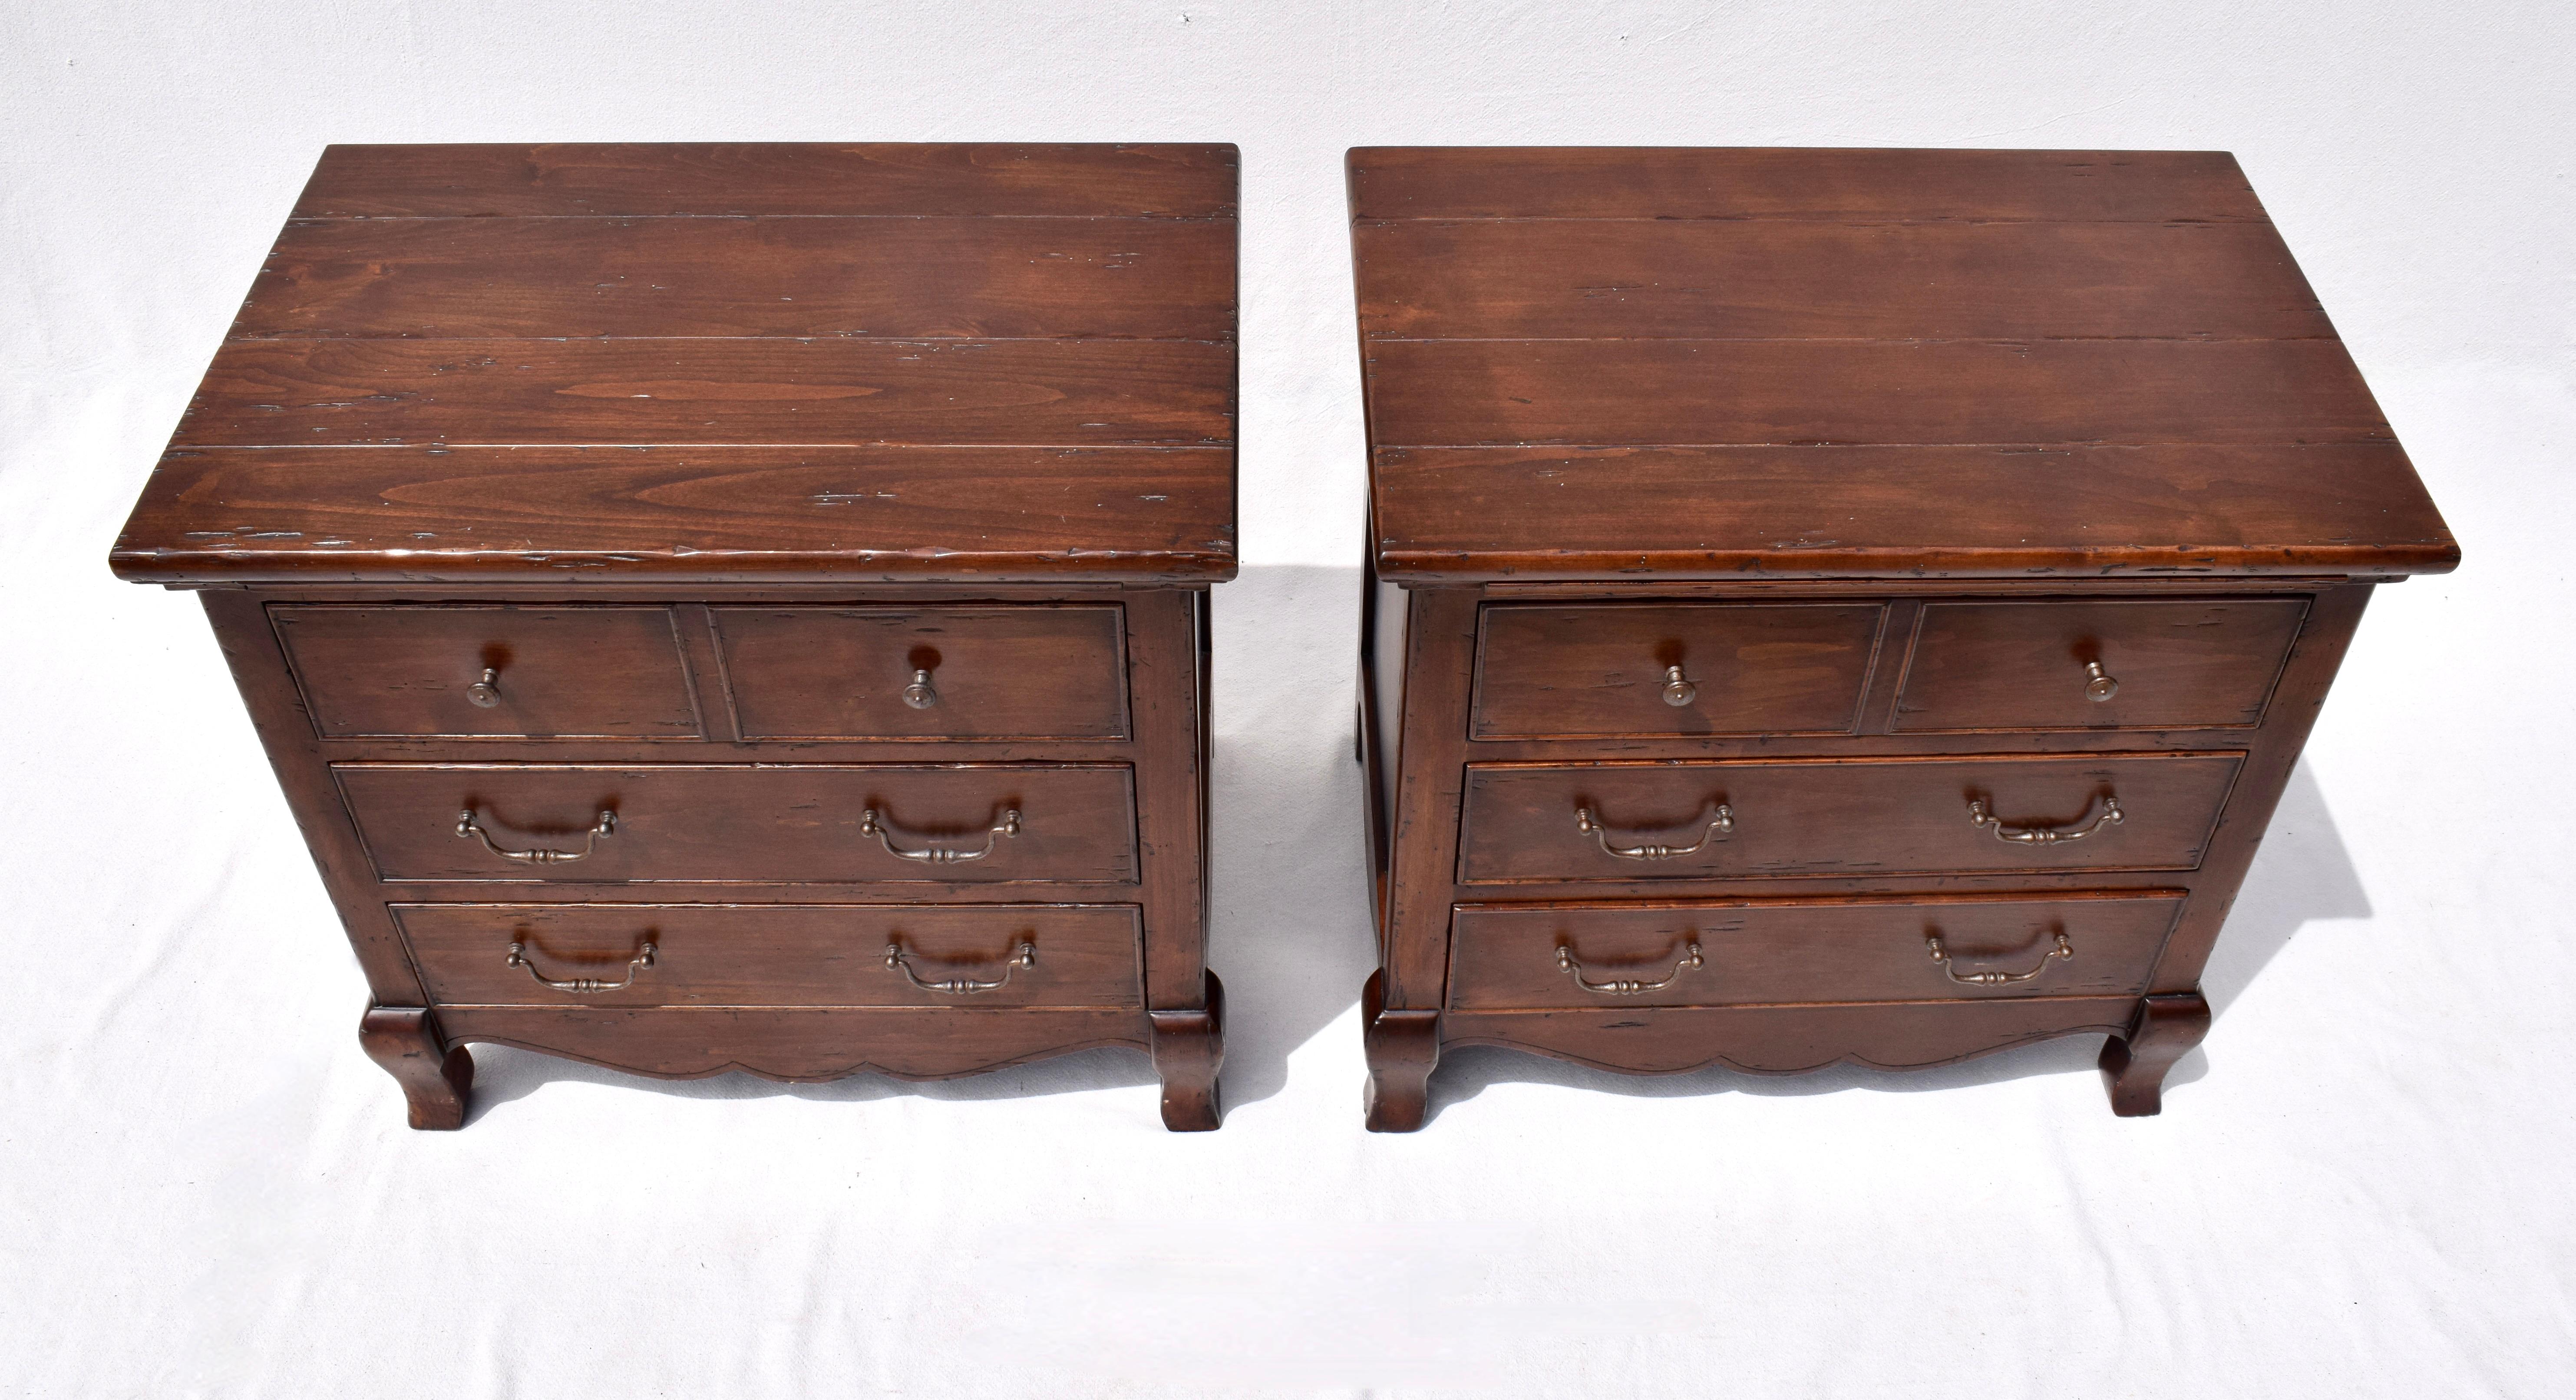 A pair of Fremarc Designs Chateau nightstands with pull-out shelf in rarely if ever used condition. Transitional in style with subtle French Country design elements.